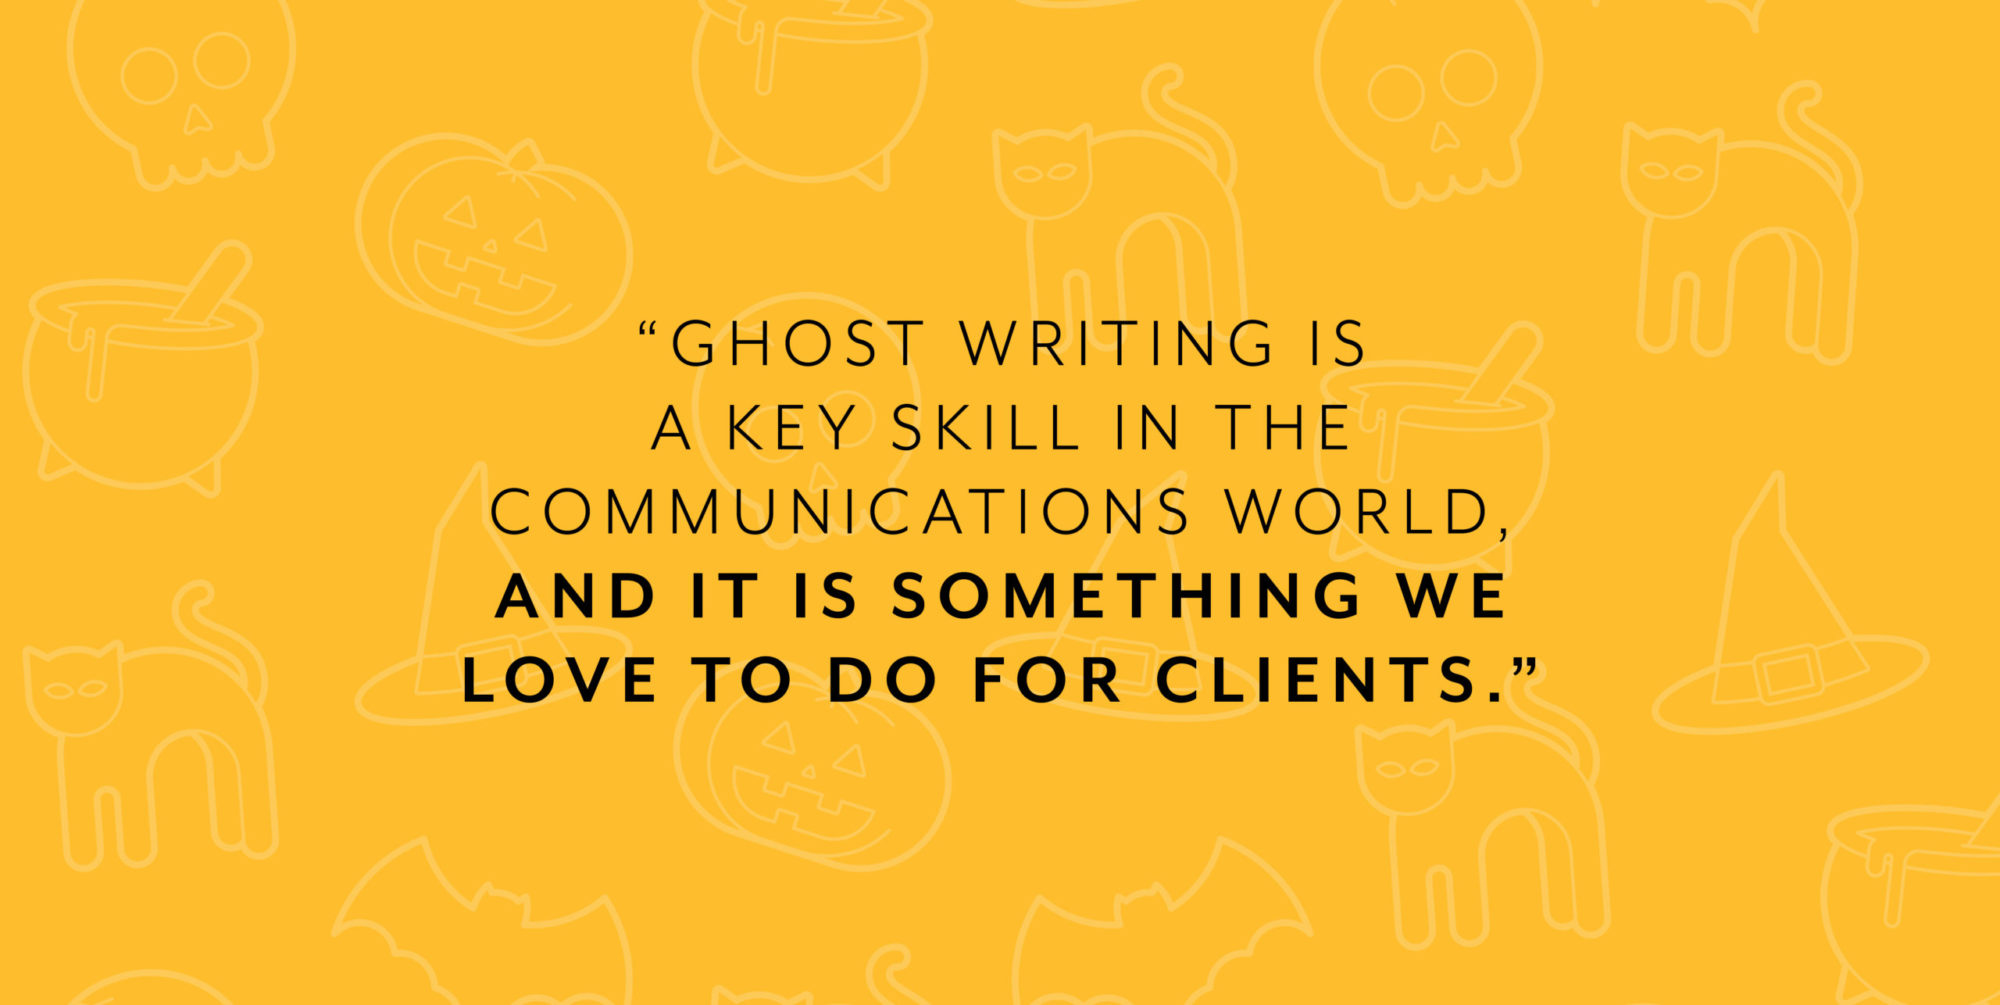 An orange background features cartoon cats and pumpkins and the words, "Ghost writing is a key skill in the communications world, and it is something we love to do for clients."